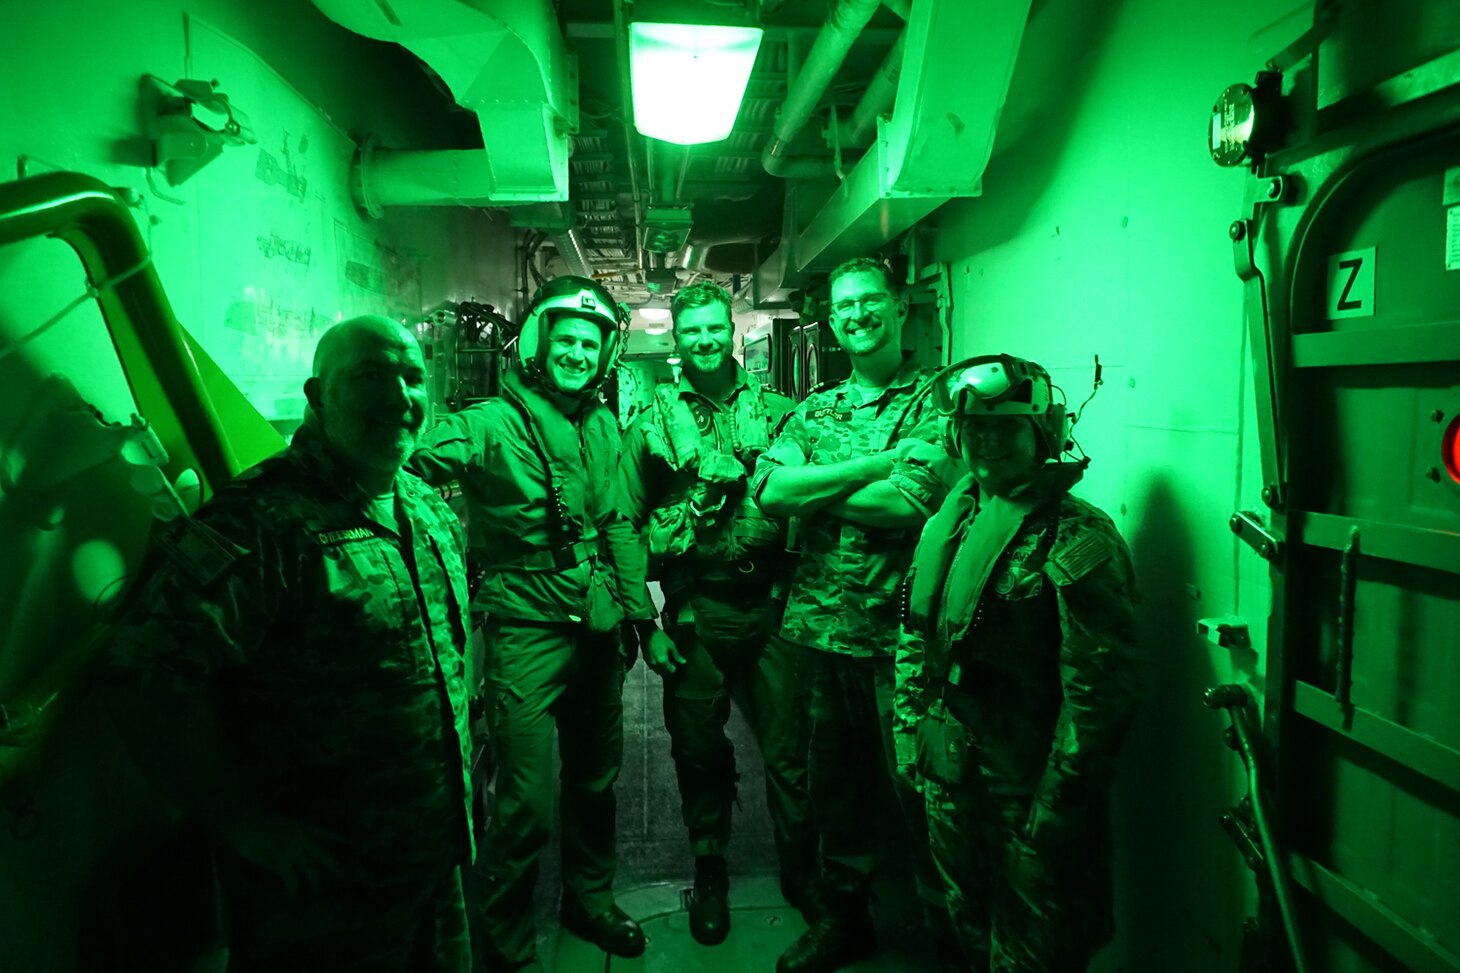 The flight deck crew of the Royal Australian Navy guided-missile frigate HMAS Melbourne (FFG 05) gather for a photo before last take-off of the day by an MH-60S Sea Hawk helicopter, assigned to the "Island Knights" of Helicopter Sea Combat Squadron (HSC) 25. HSC-25 provides a multi-mission rotary wing capability for units in the U.S. 7th Fleet area of operations and maintains a Guam-based 24-hour search-and-rescue and medical evacuation capability, directly supporting U.S. Coast Guard and Joint Region Marianas. HSC-25 is the Navy’s only forward-deployed MH-60S expeditionary squadron.